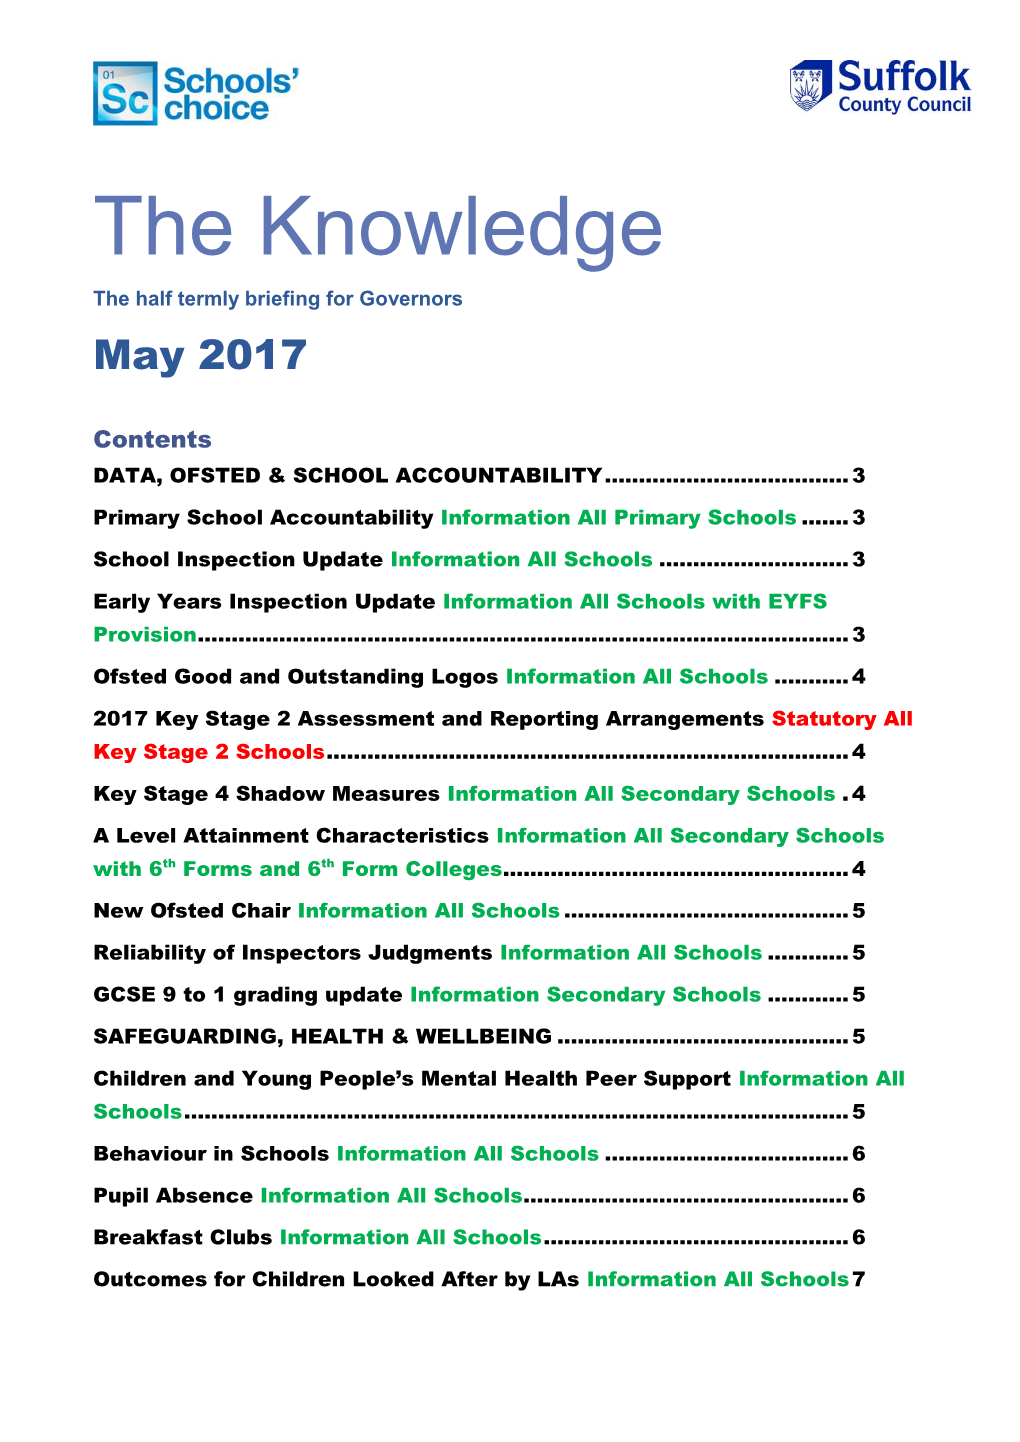 The Knowledge May 2017